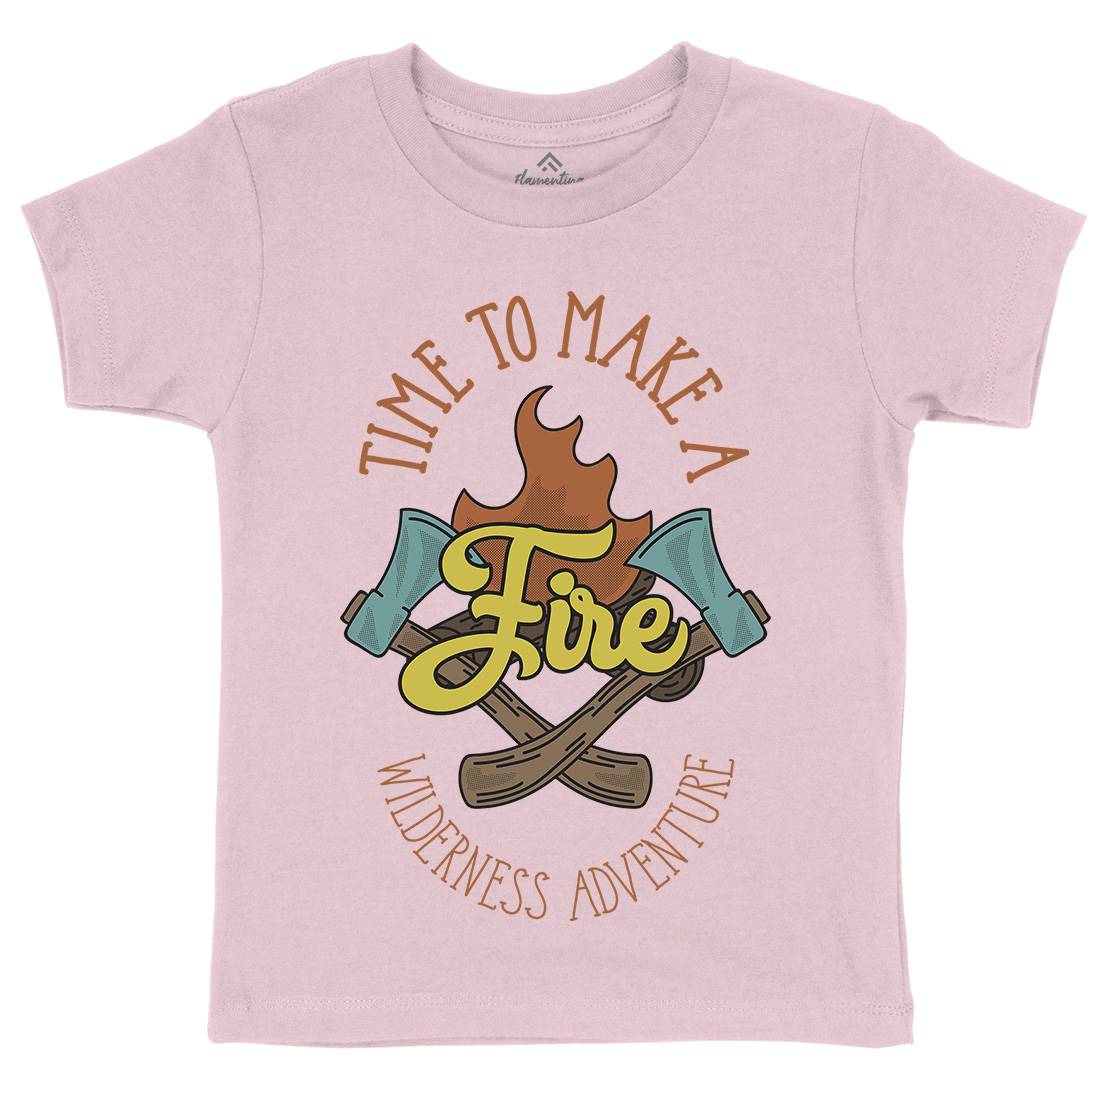 Time To Make Fire Kids Crew Neck T-Shirt Nature D992